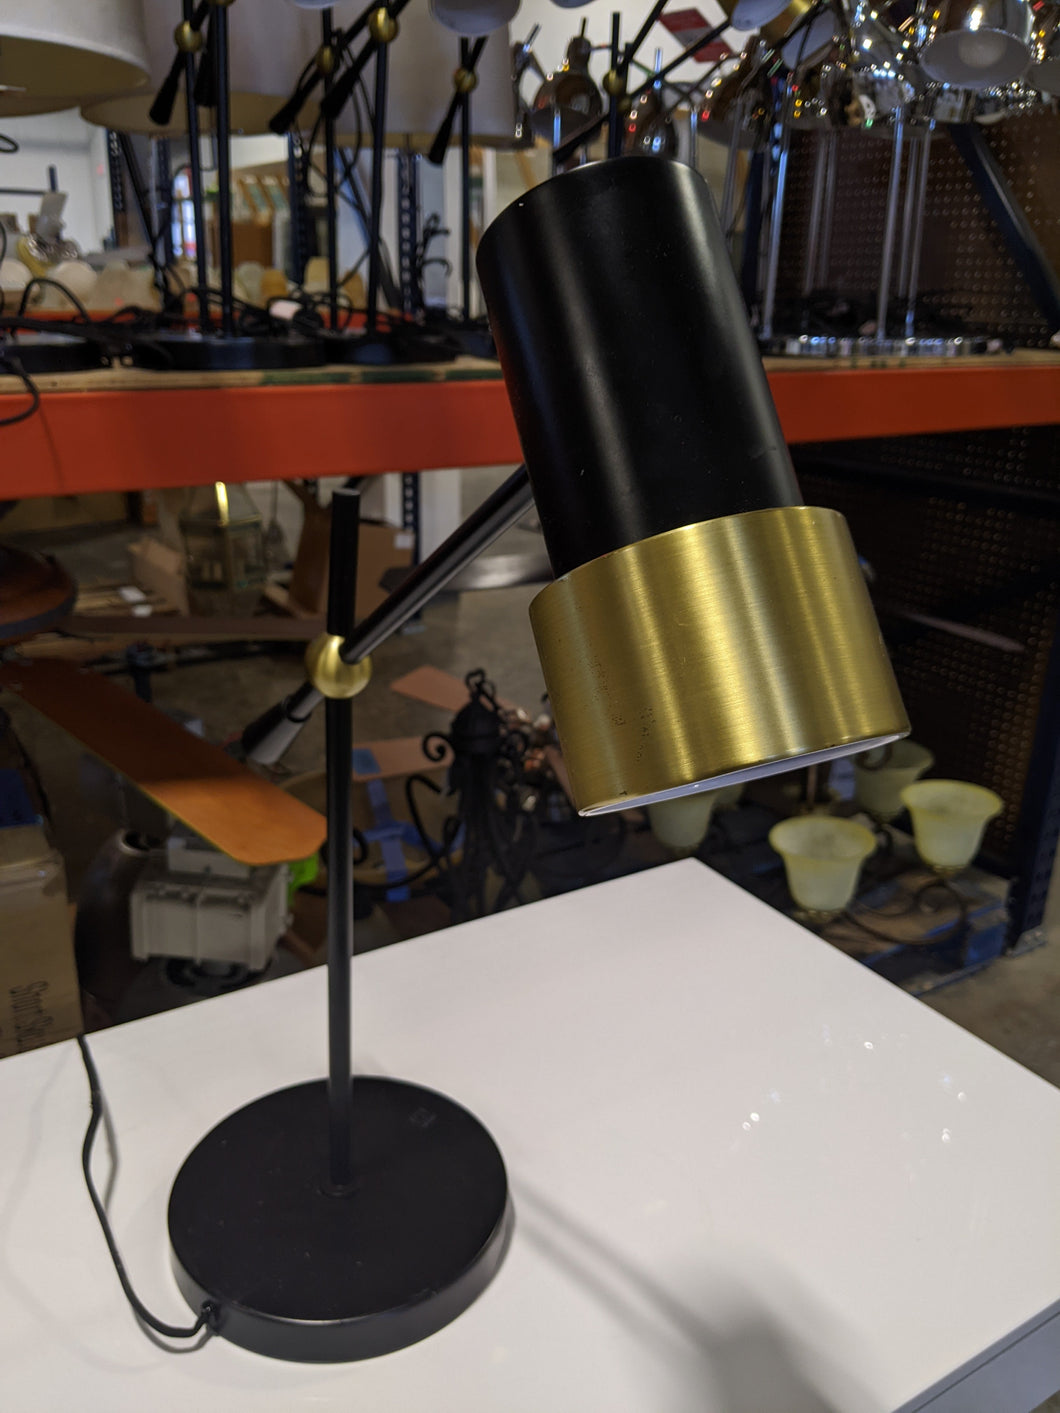 Poydras Black and Gold Lamp - Kenner Habitat for Humanity ReStore